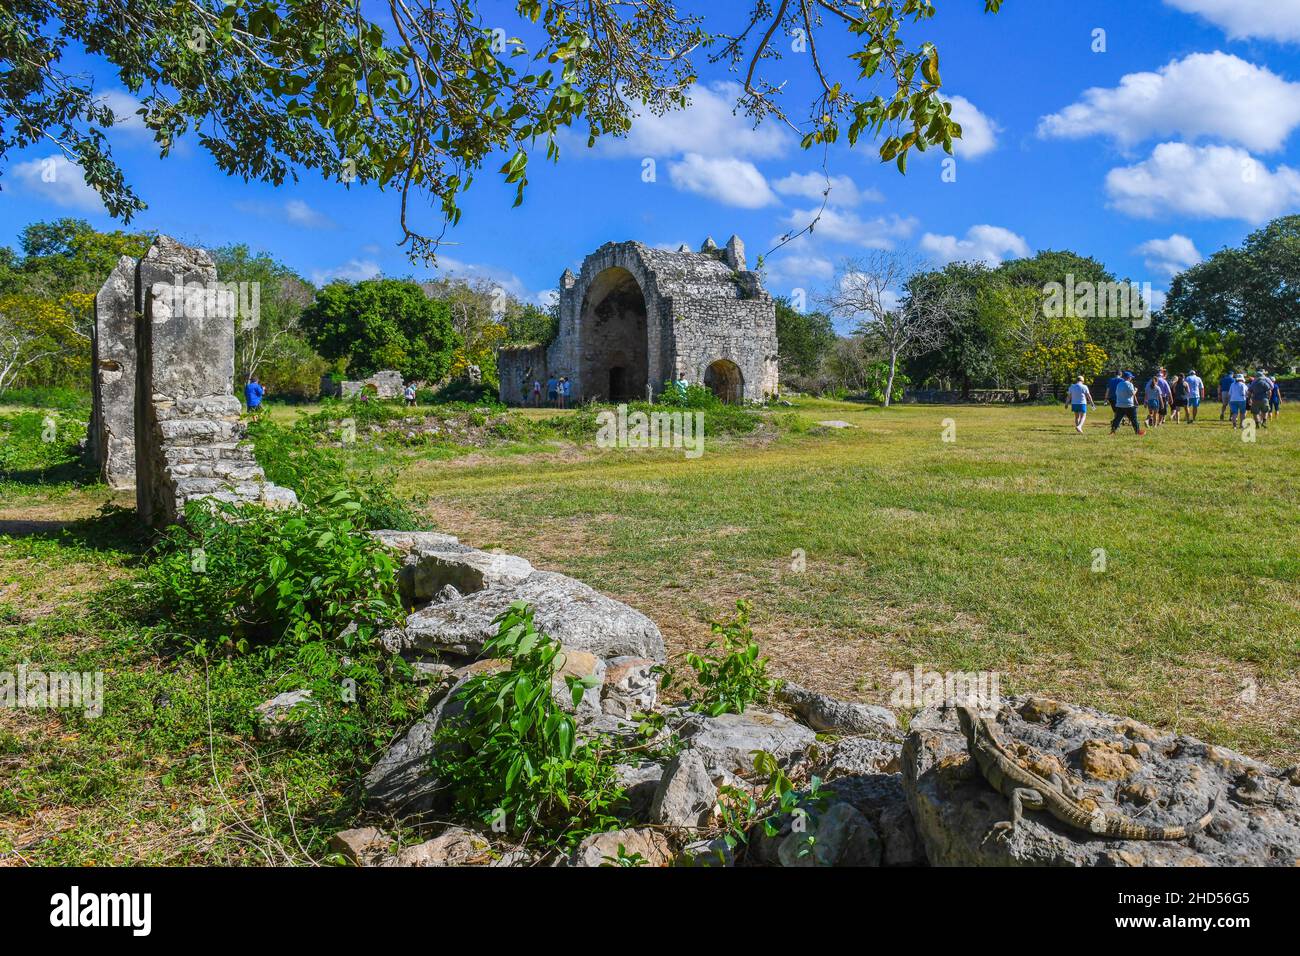 Ruins of the colonial 16th Century Open Chapel, on the Mayan Archeological site of Dzibilchaltún, Yucatan, Mexico Stock Photo